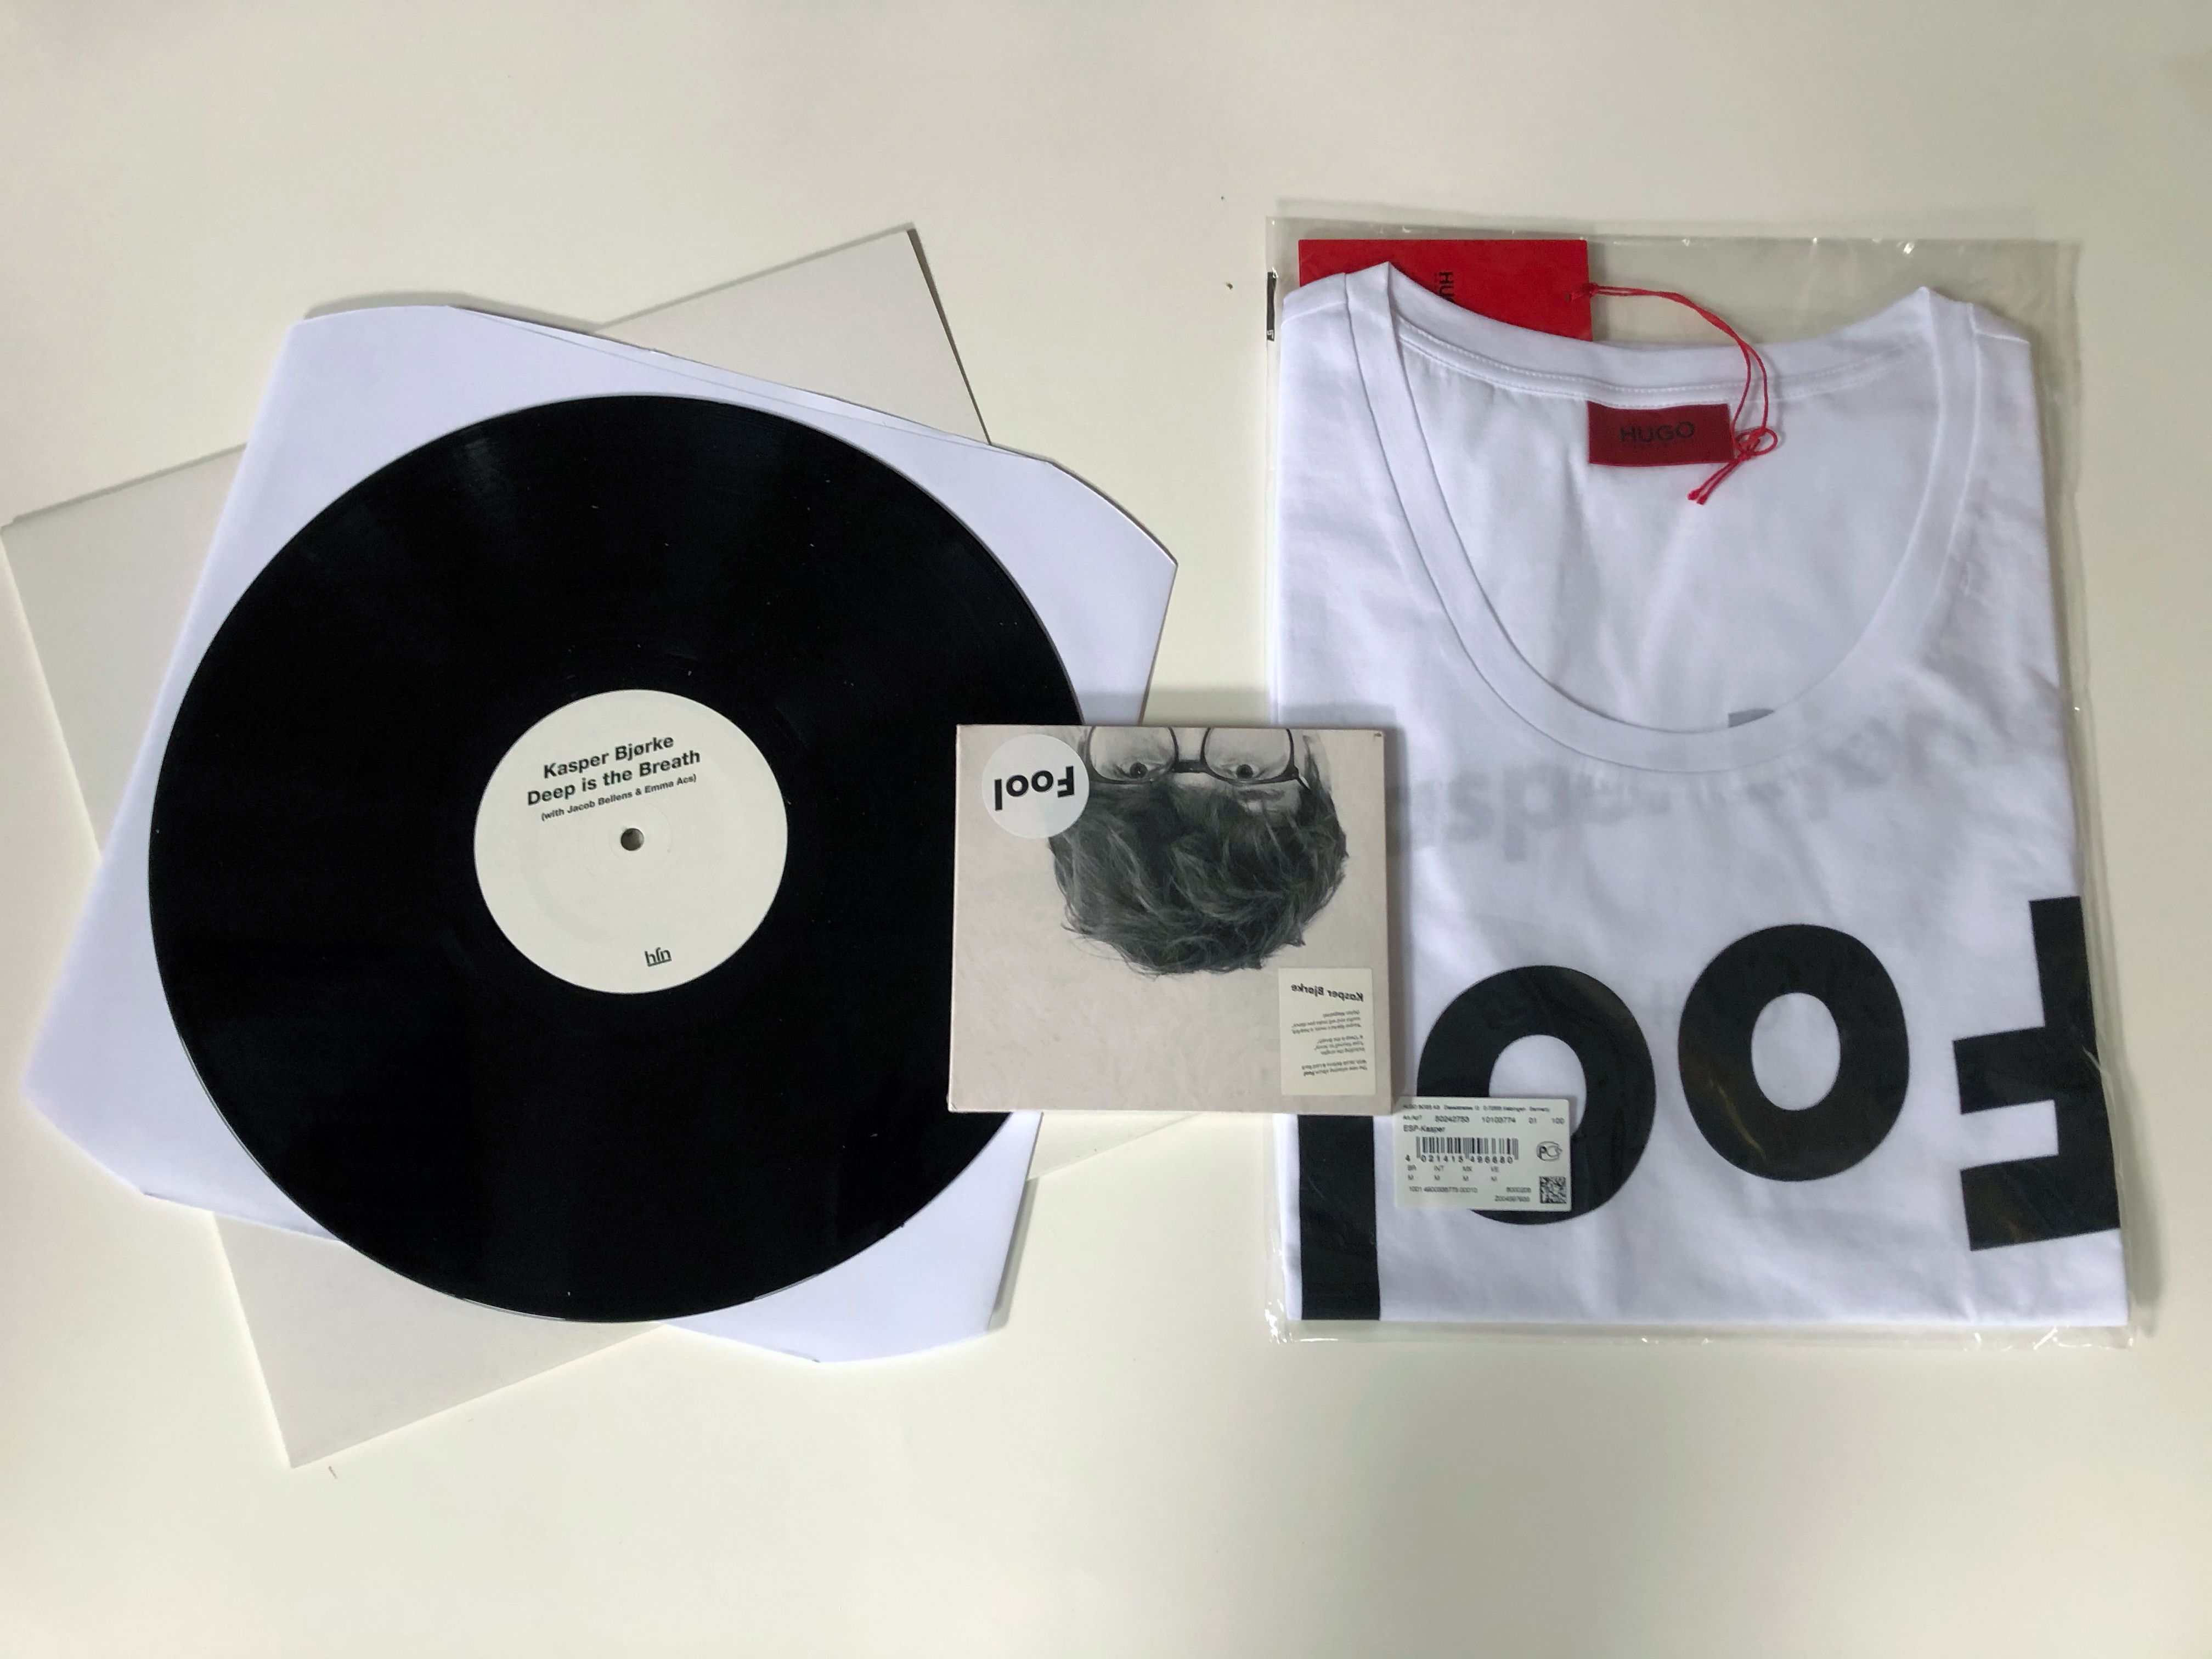 A Bandcamp exclusive bundle including the Hugo Boss "Fool" T-shirt, the CD album "Fool" the 12" vinyl EP "Deep Is The Breath" and the digital album "Nothing Gold Can Stay Remixes Part A".